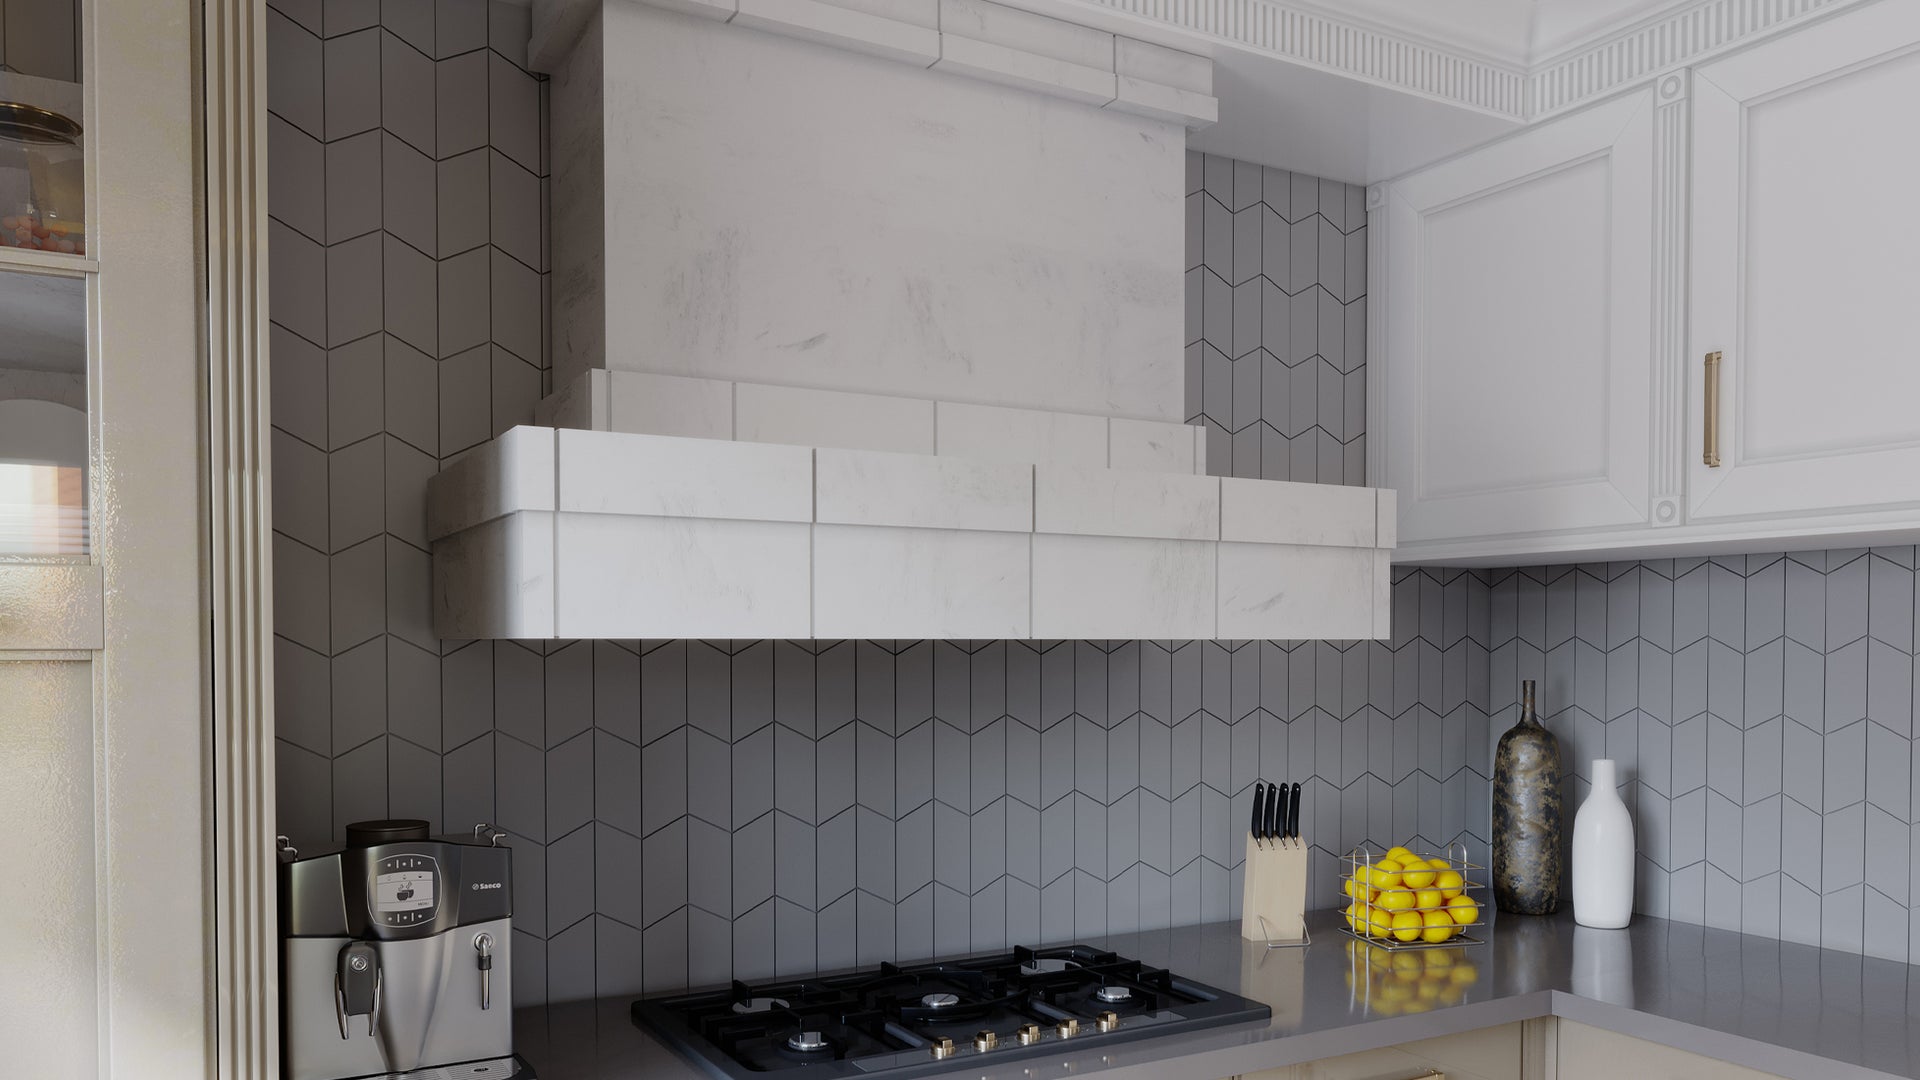 Transitional style kitchen hood in white honed Danby Marble